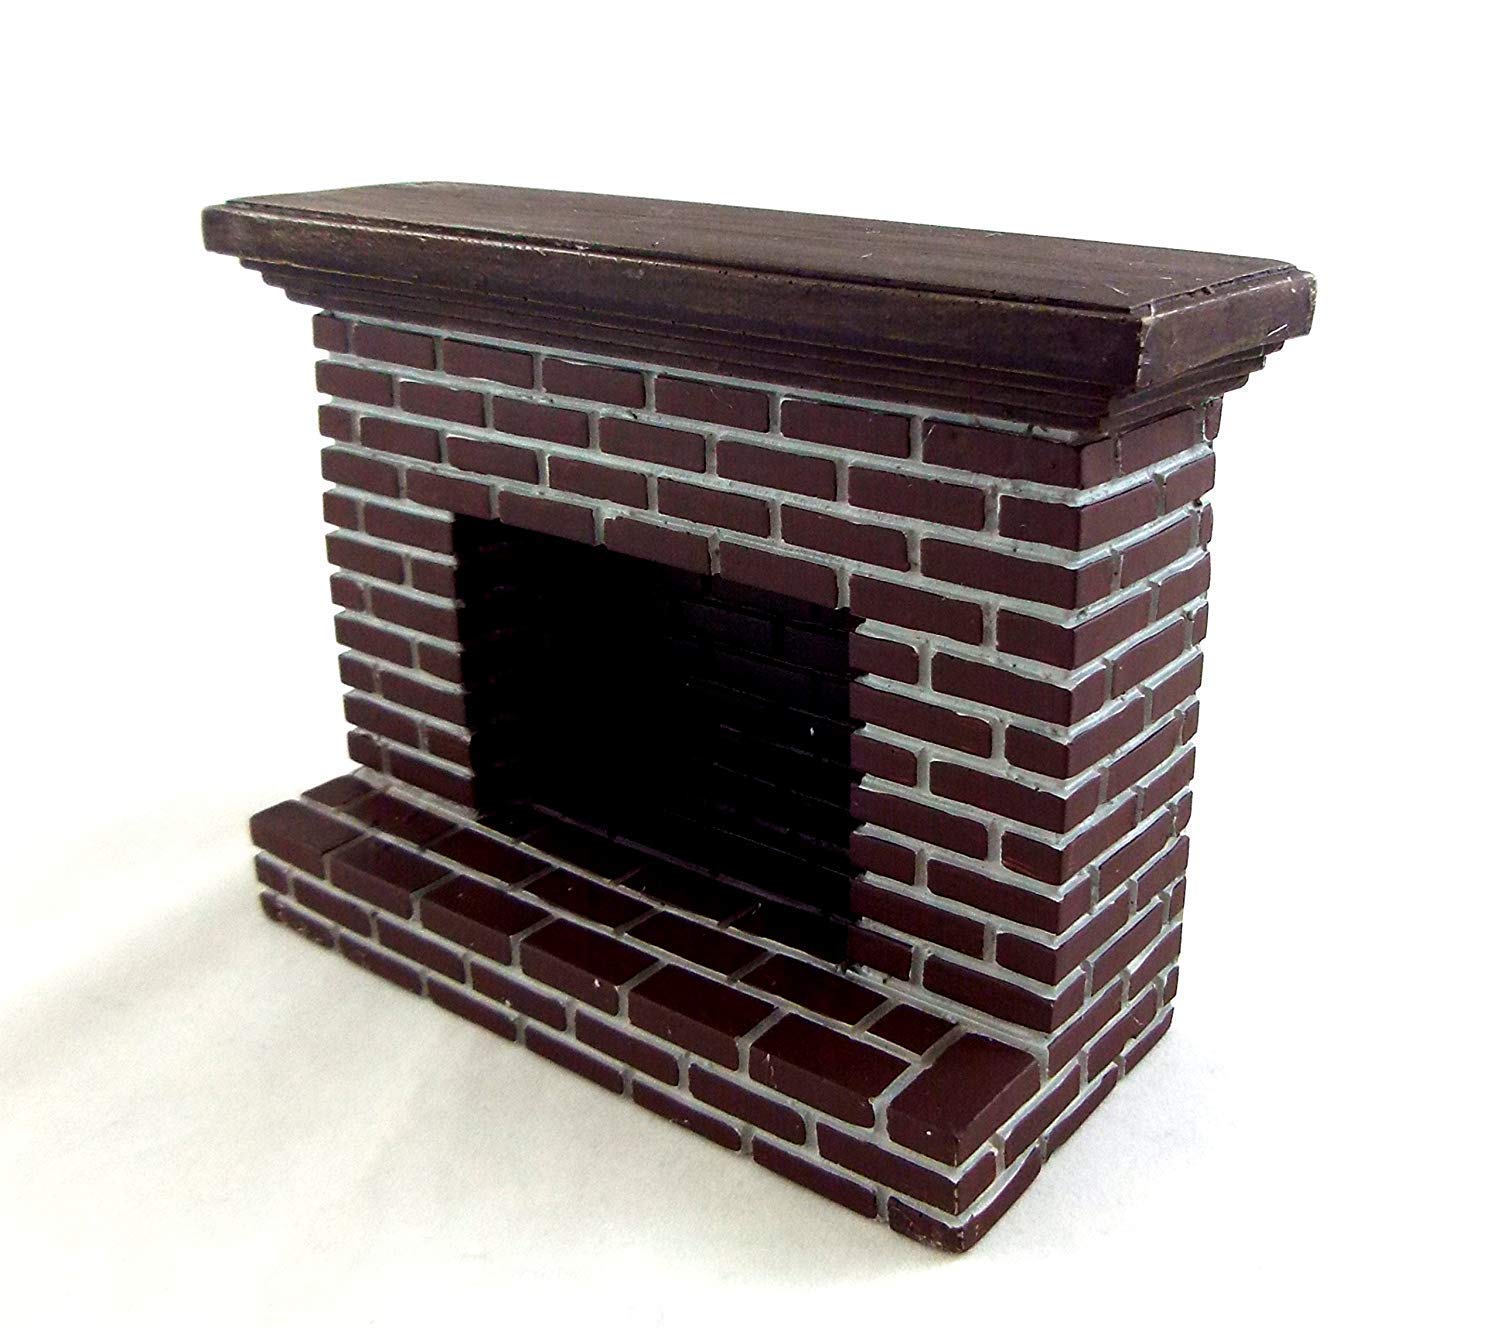 Aztec imports inc small red brick fireplace toys games